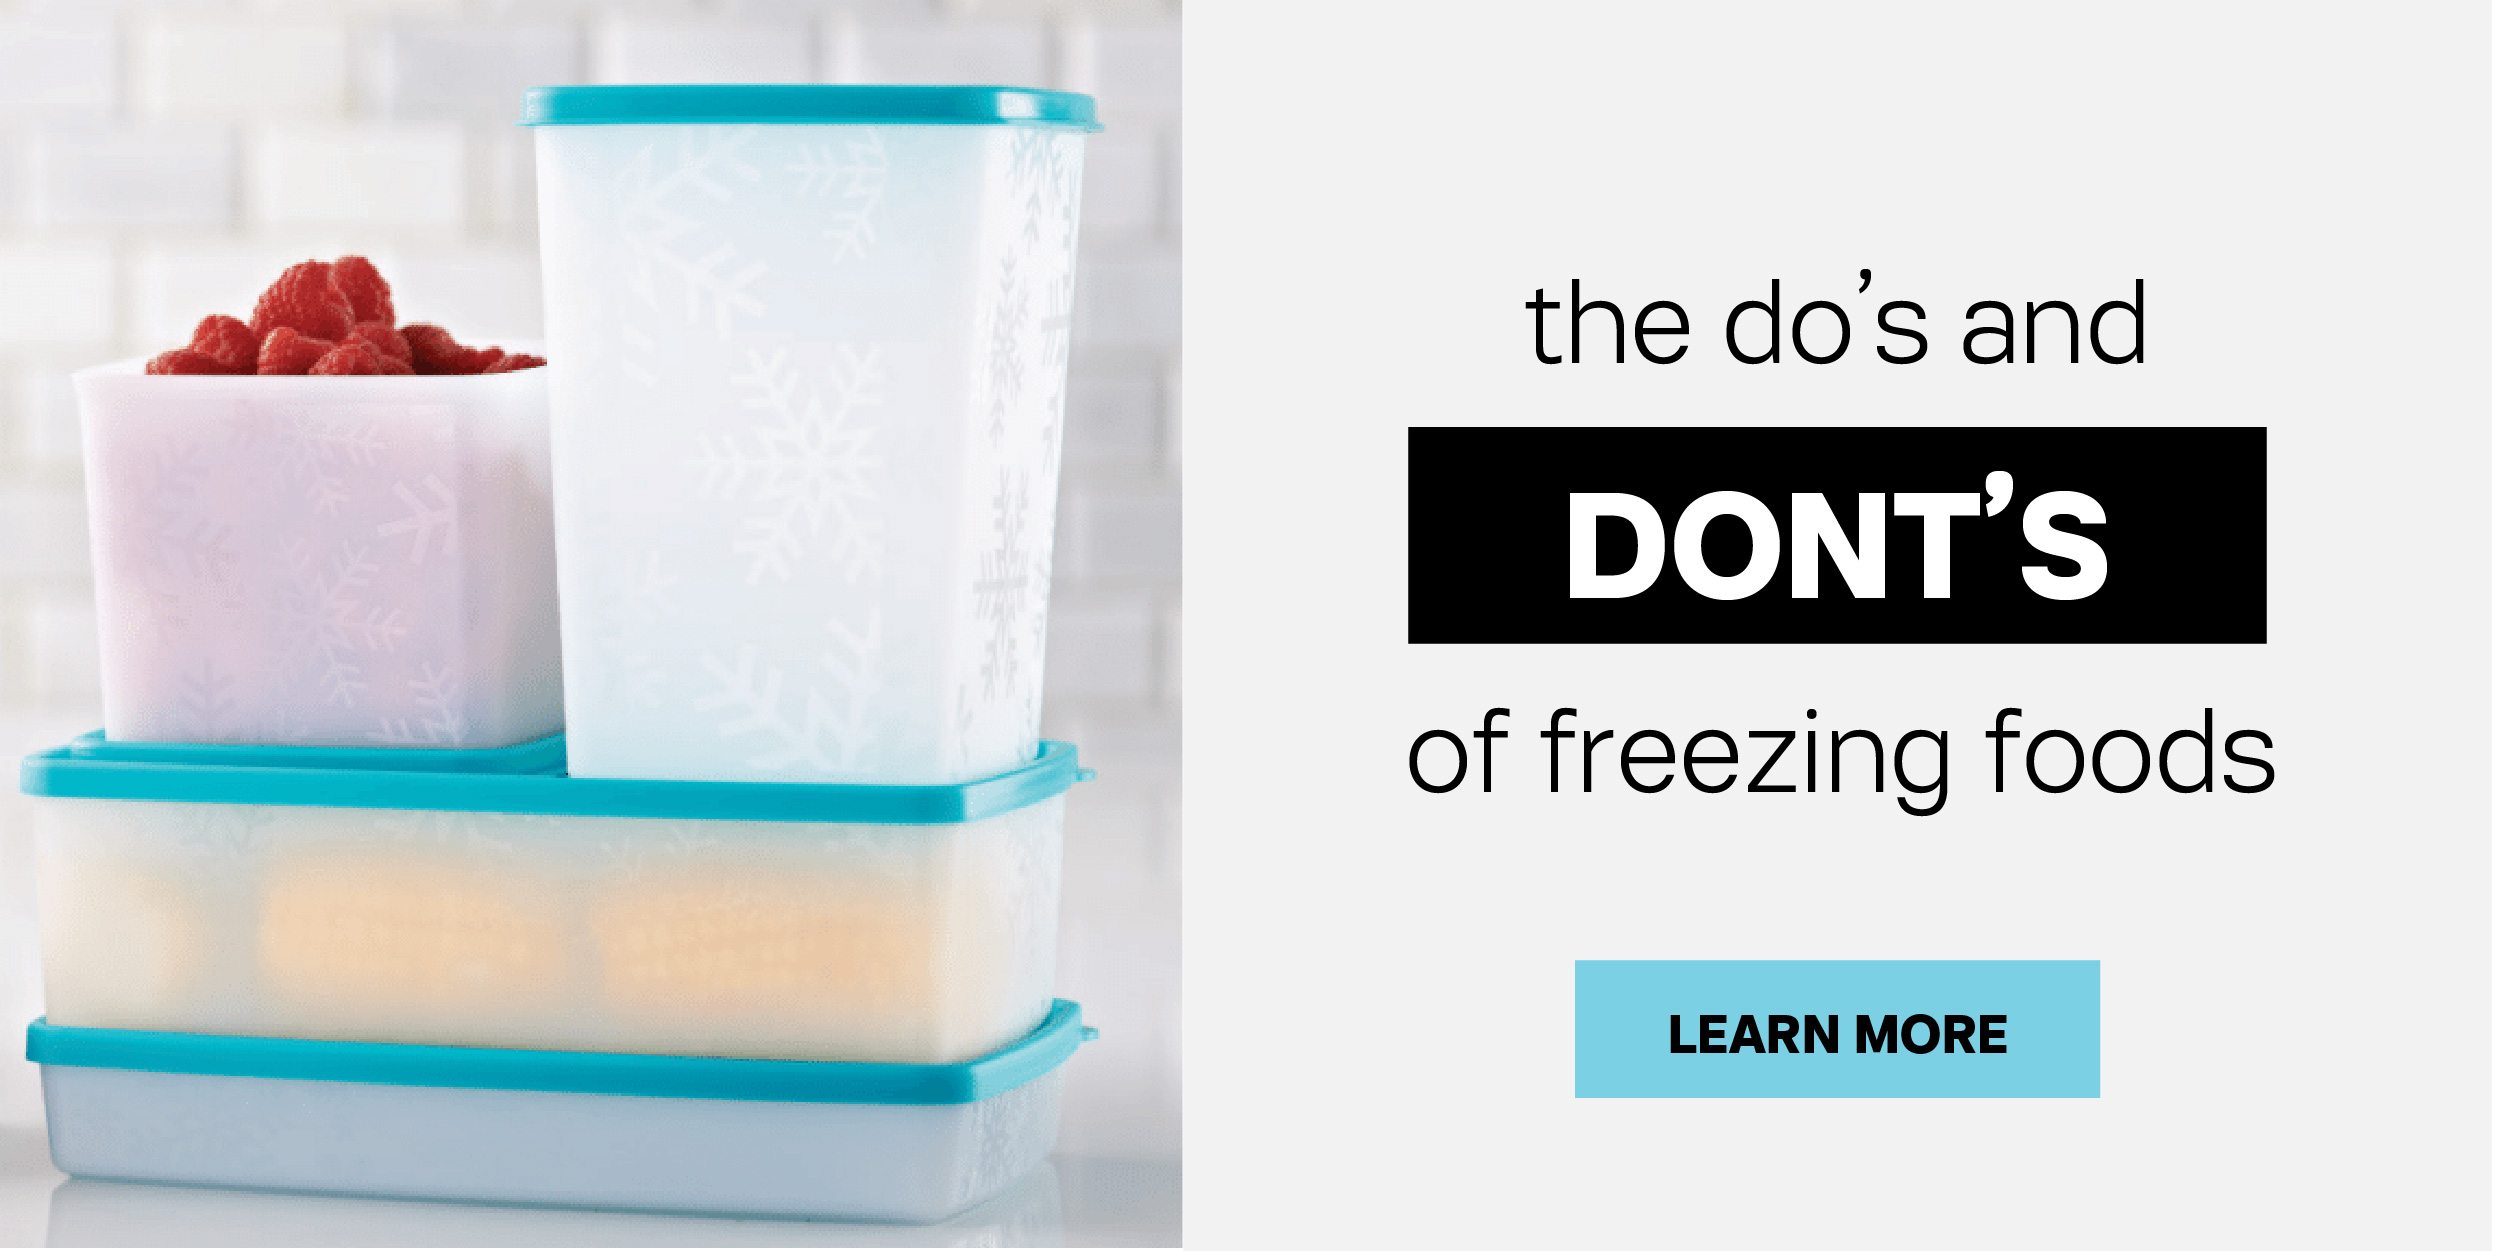 Do's and Don'ts of freezing foods